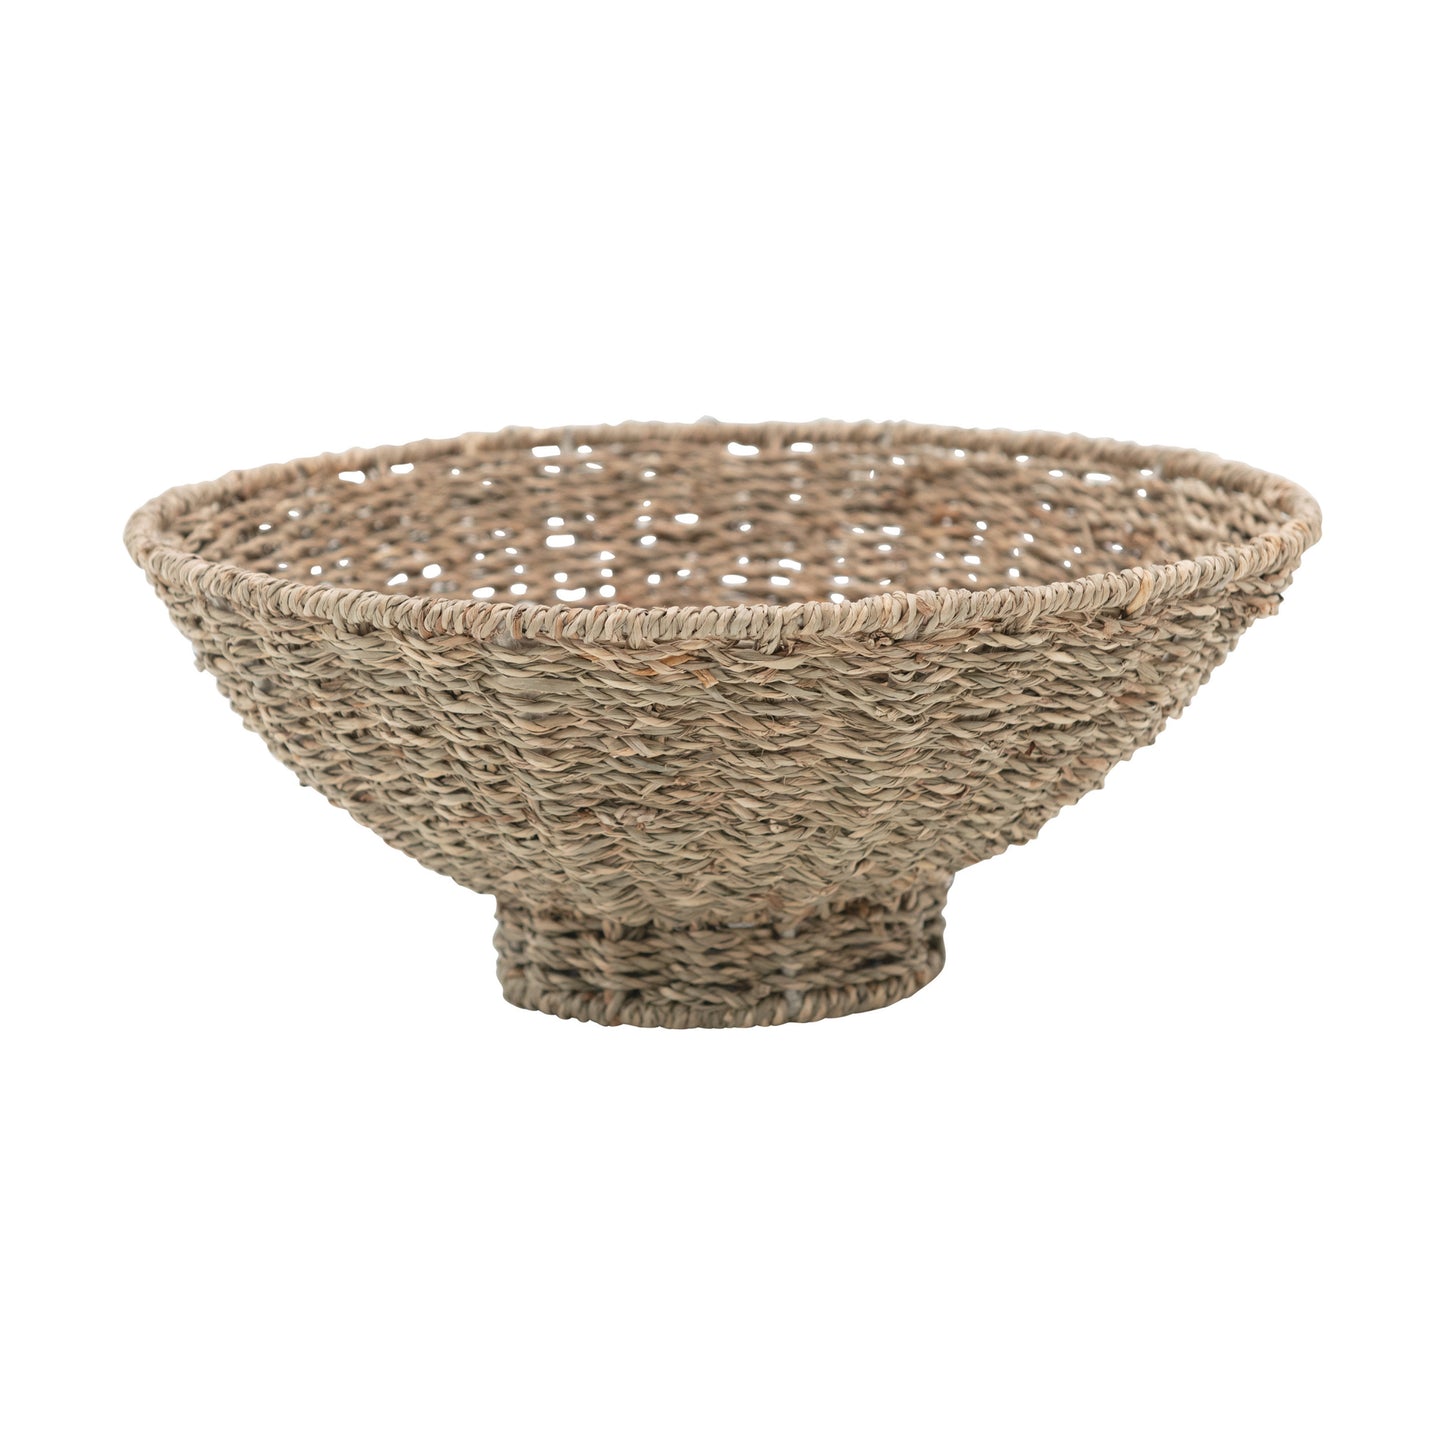 Hand-Woven Seagrass Footed Bowl